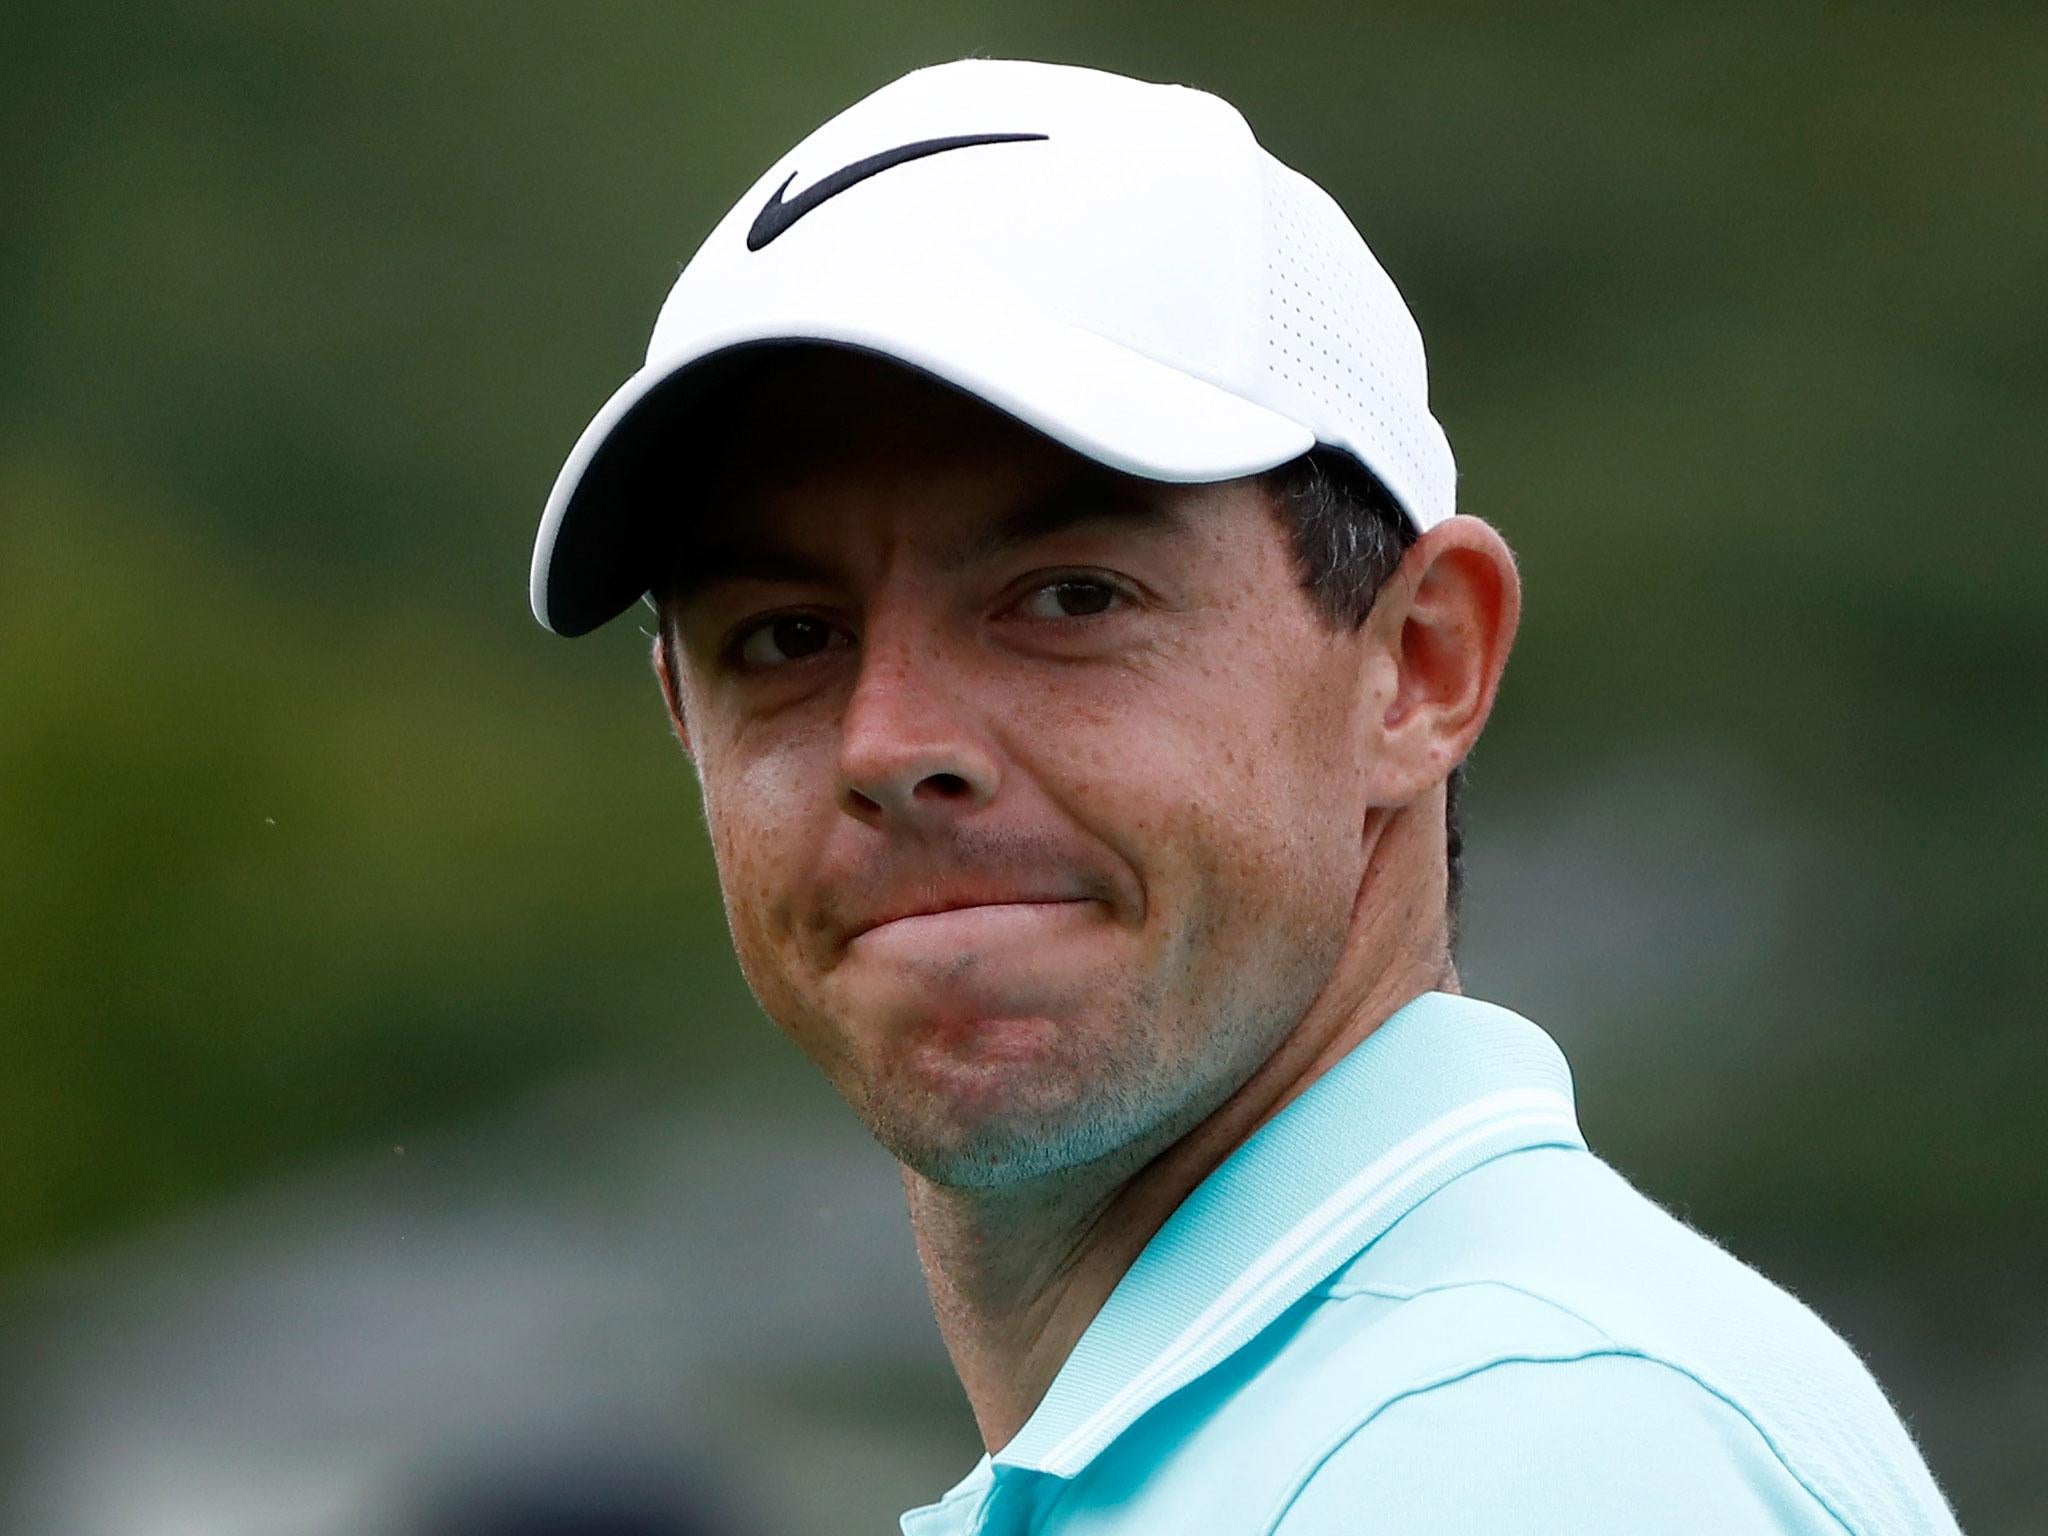 McIlroy is taking advantage of a rare opportunity for a break